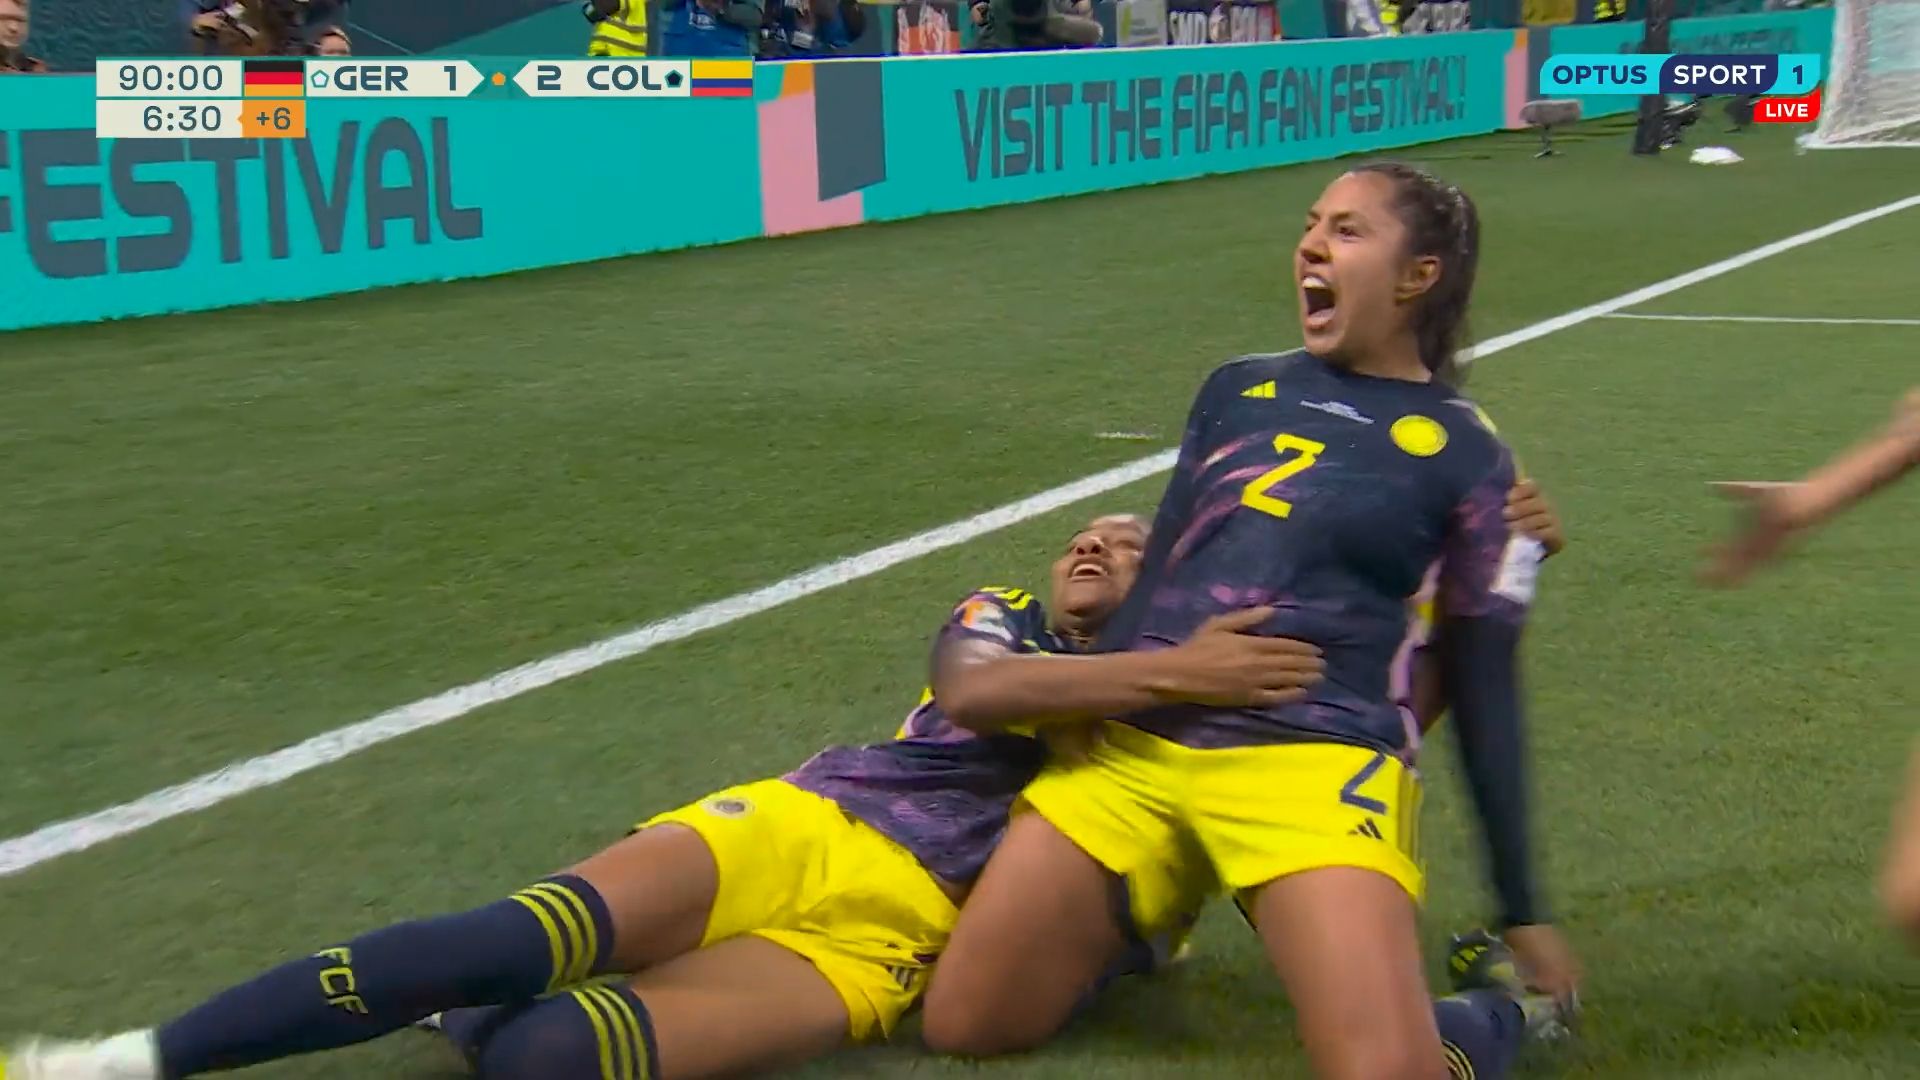 Germany stunned by Colombia as stoppage time goal seals Women's World Cup upset